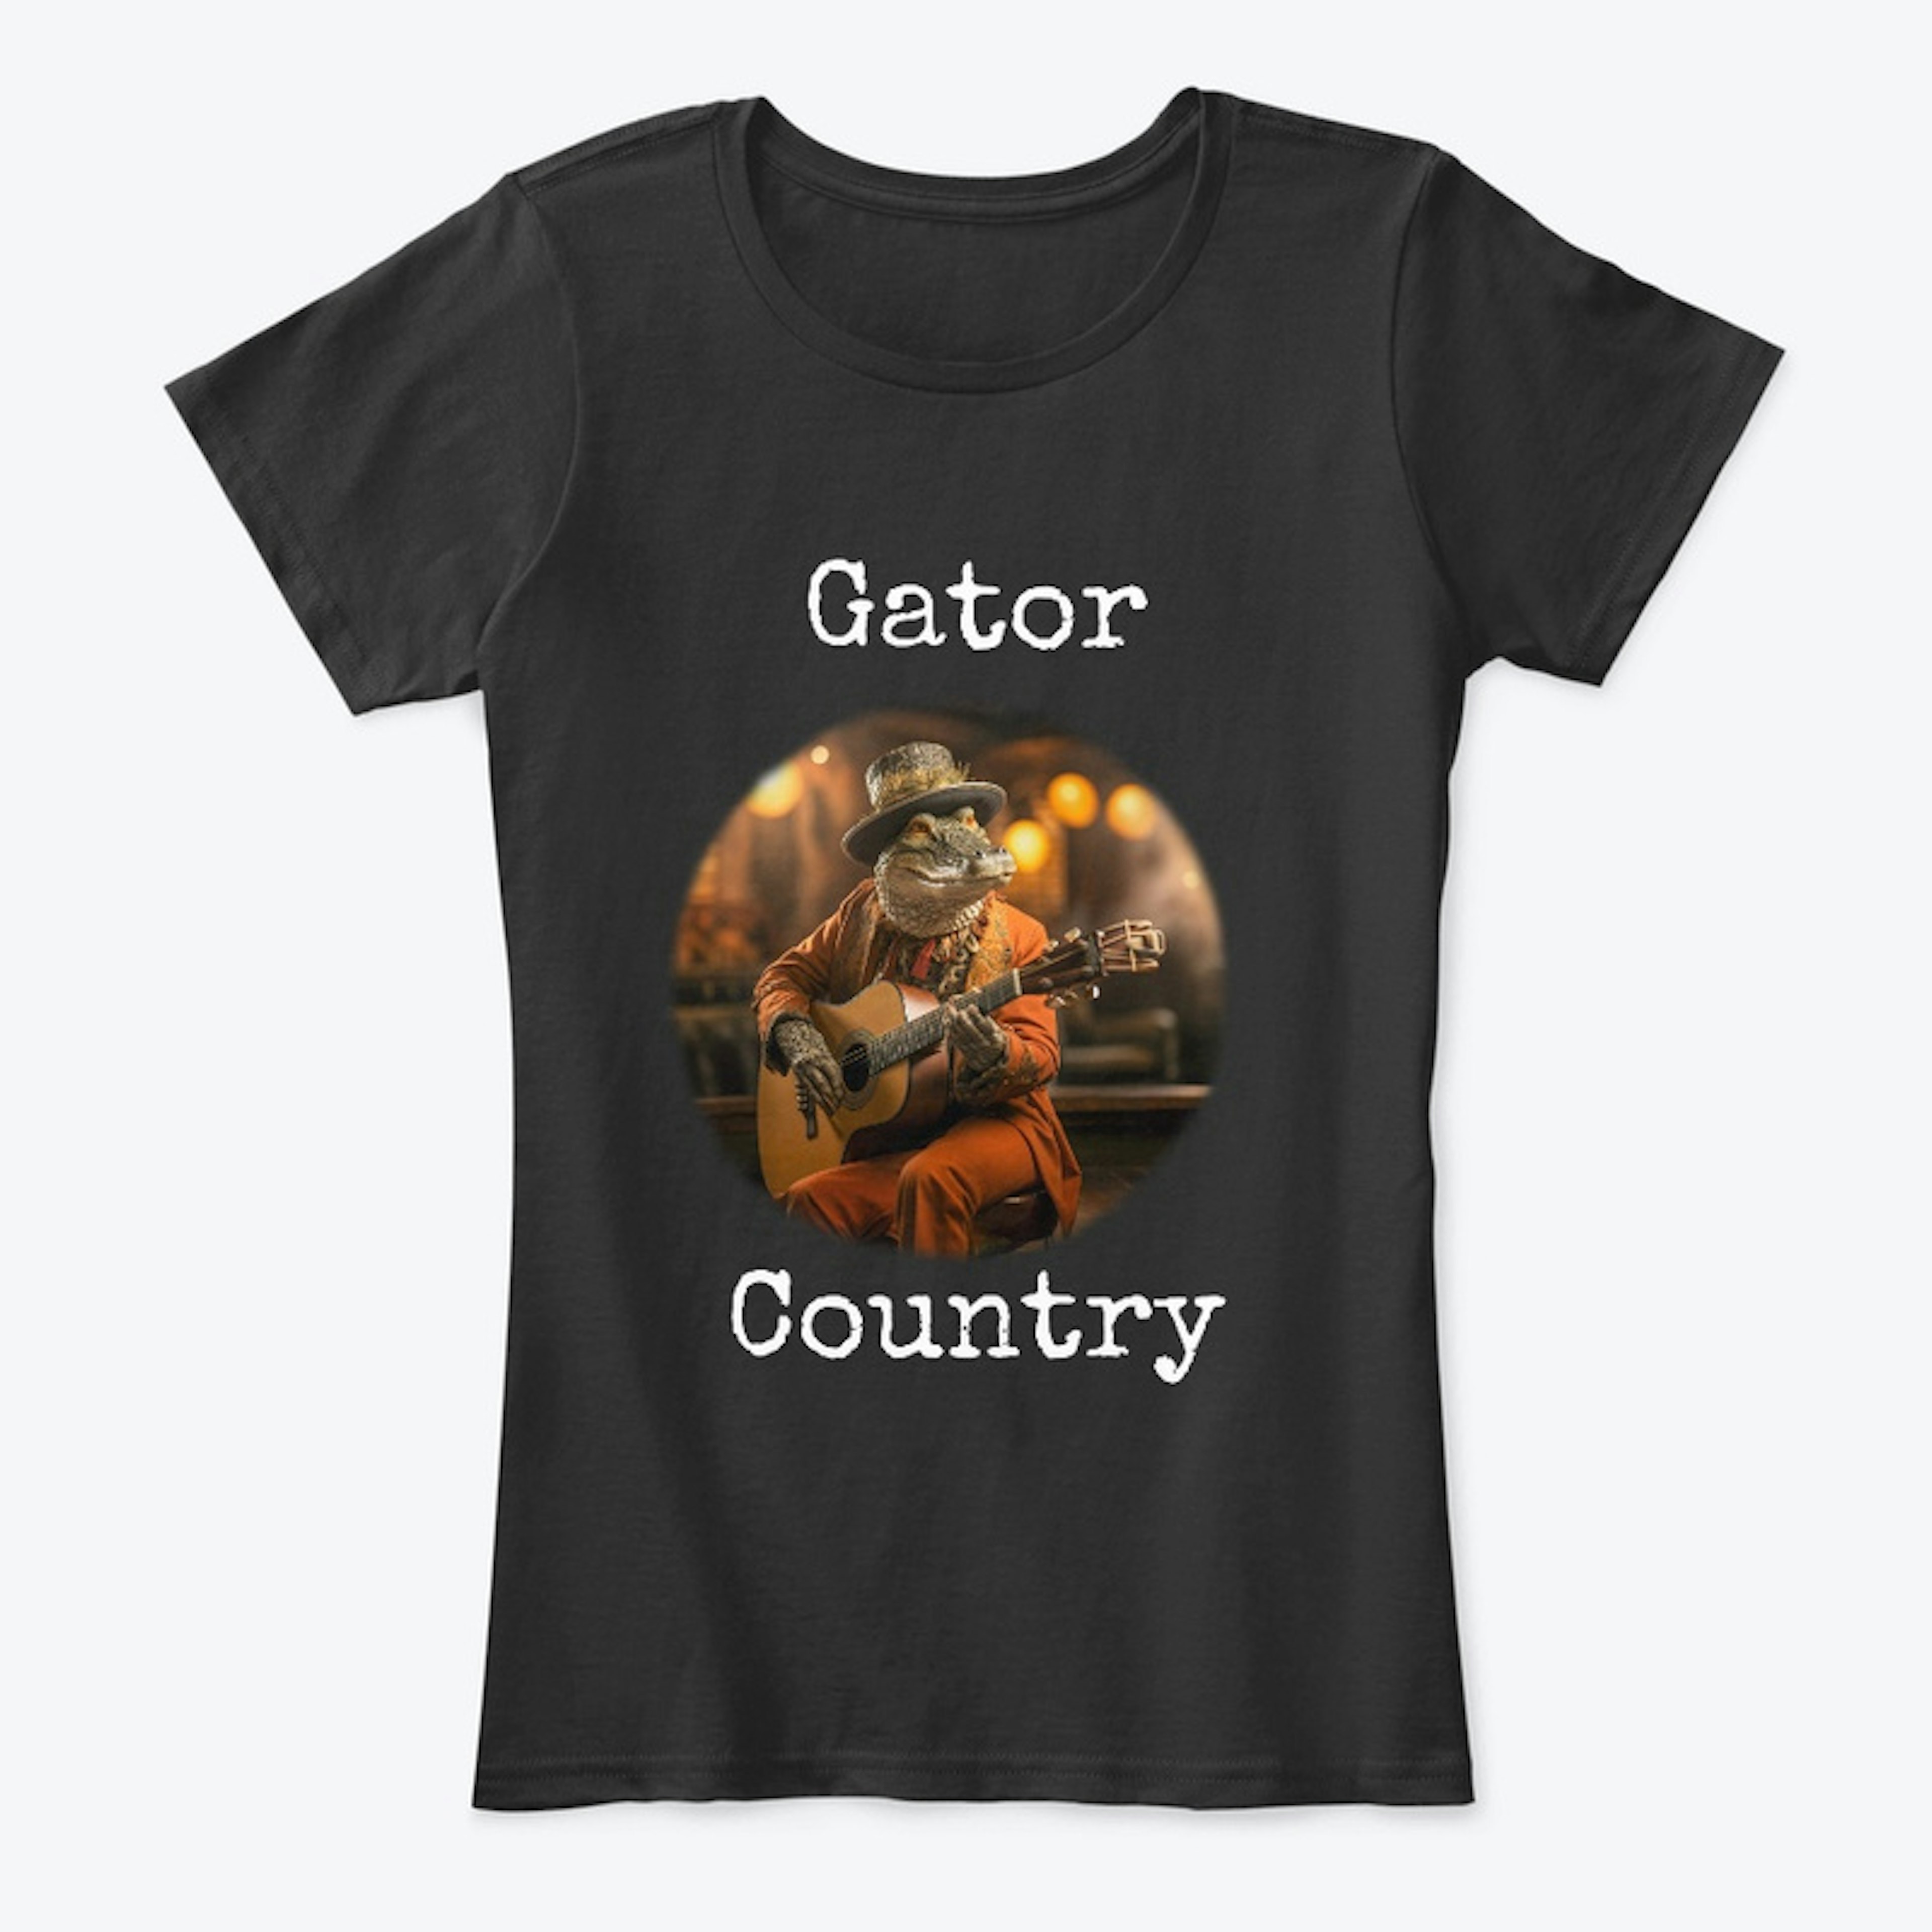 Florida is Gator Country